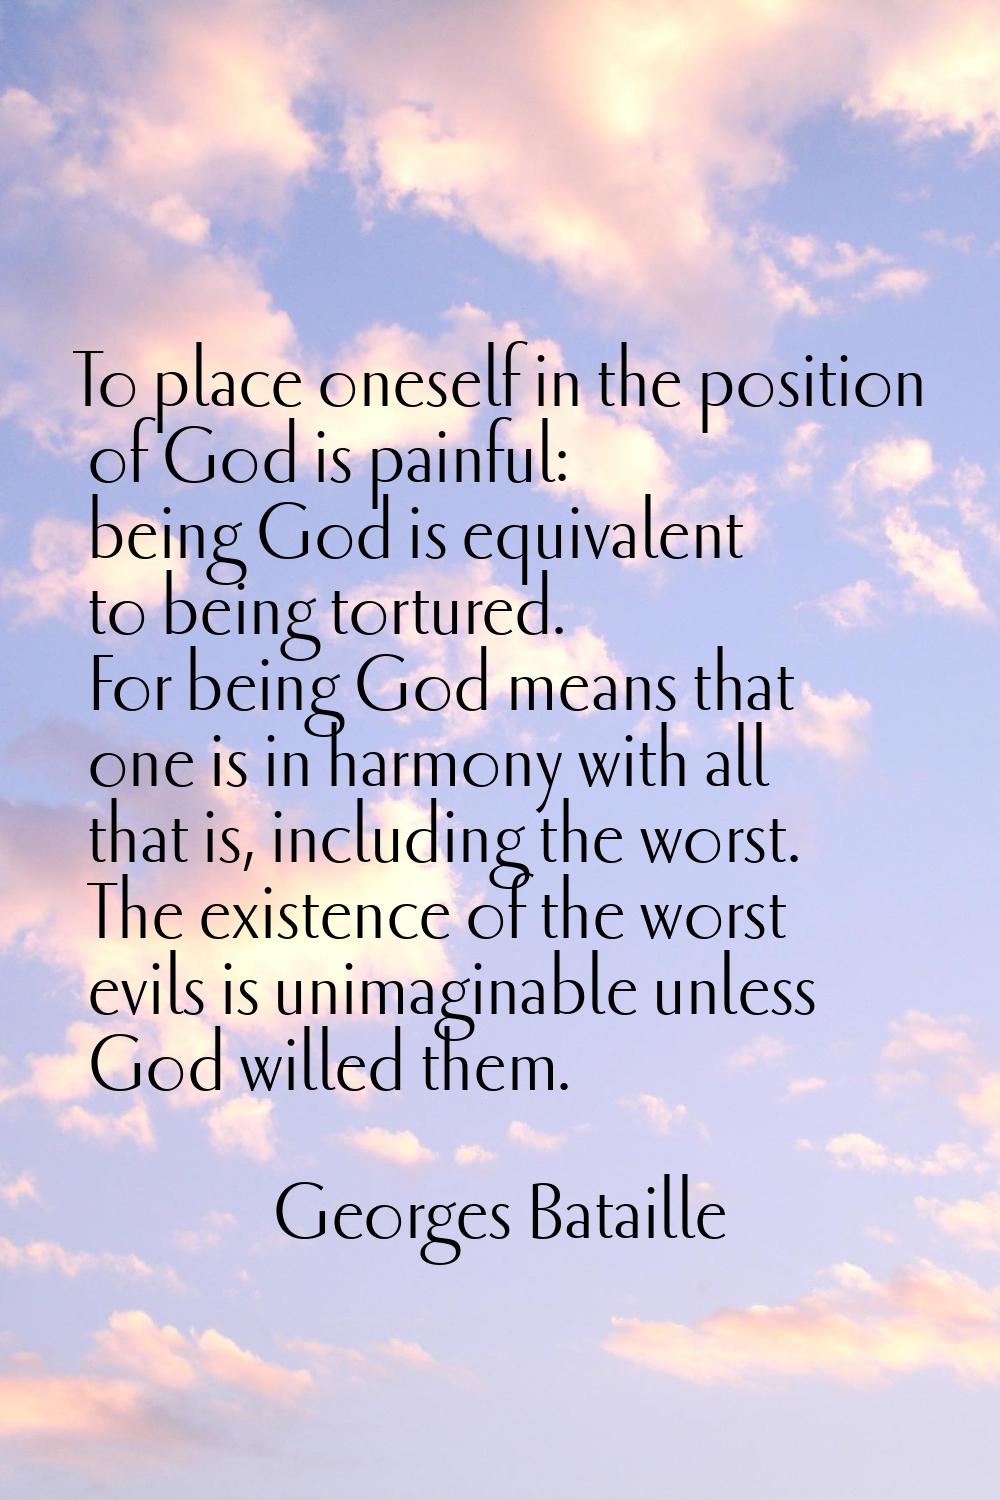 To place oneself in the position of God is painful: being God is equivalent to being tortured. For 